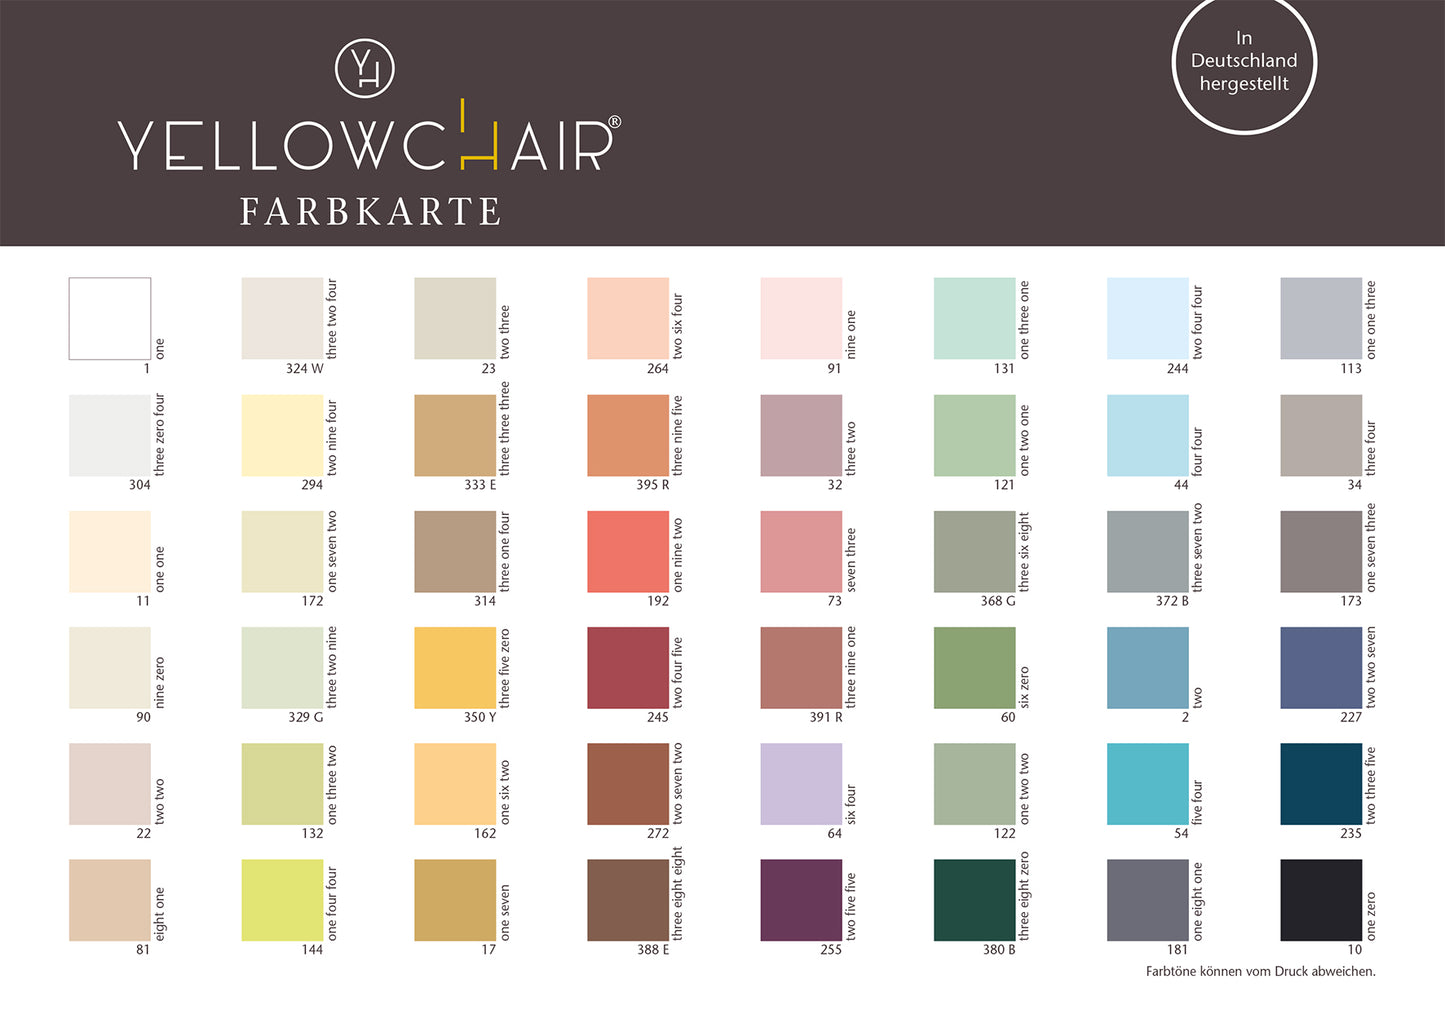 Complete package for your furniture painting with your favorite color